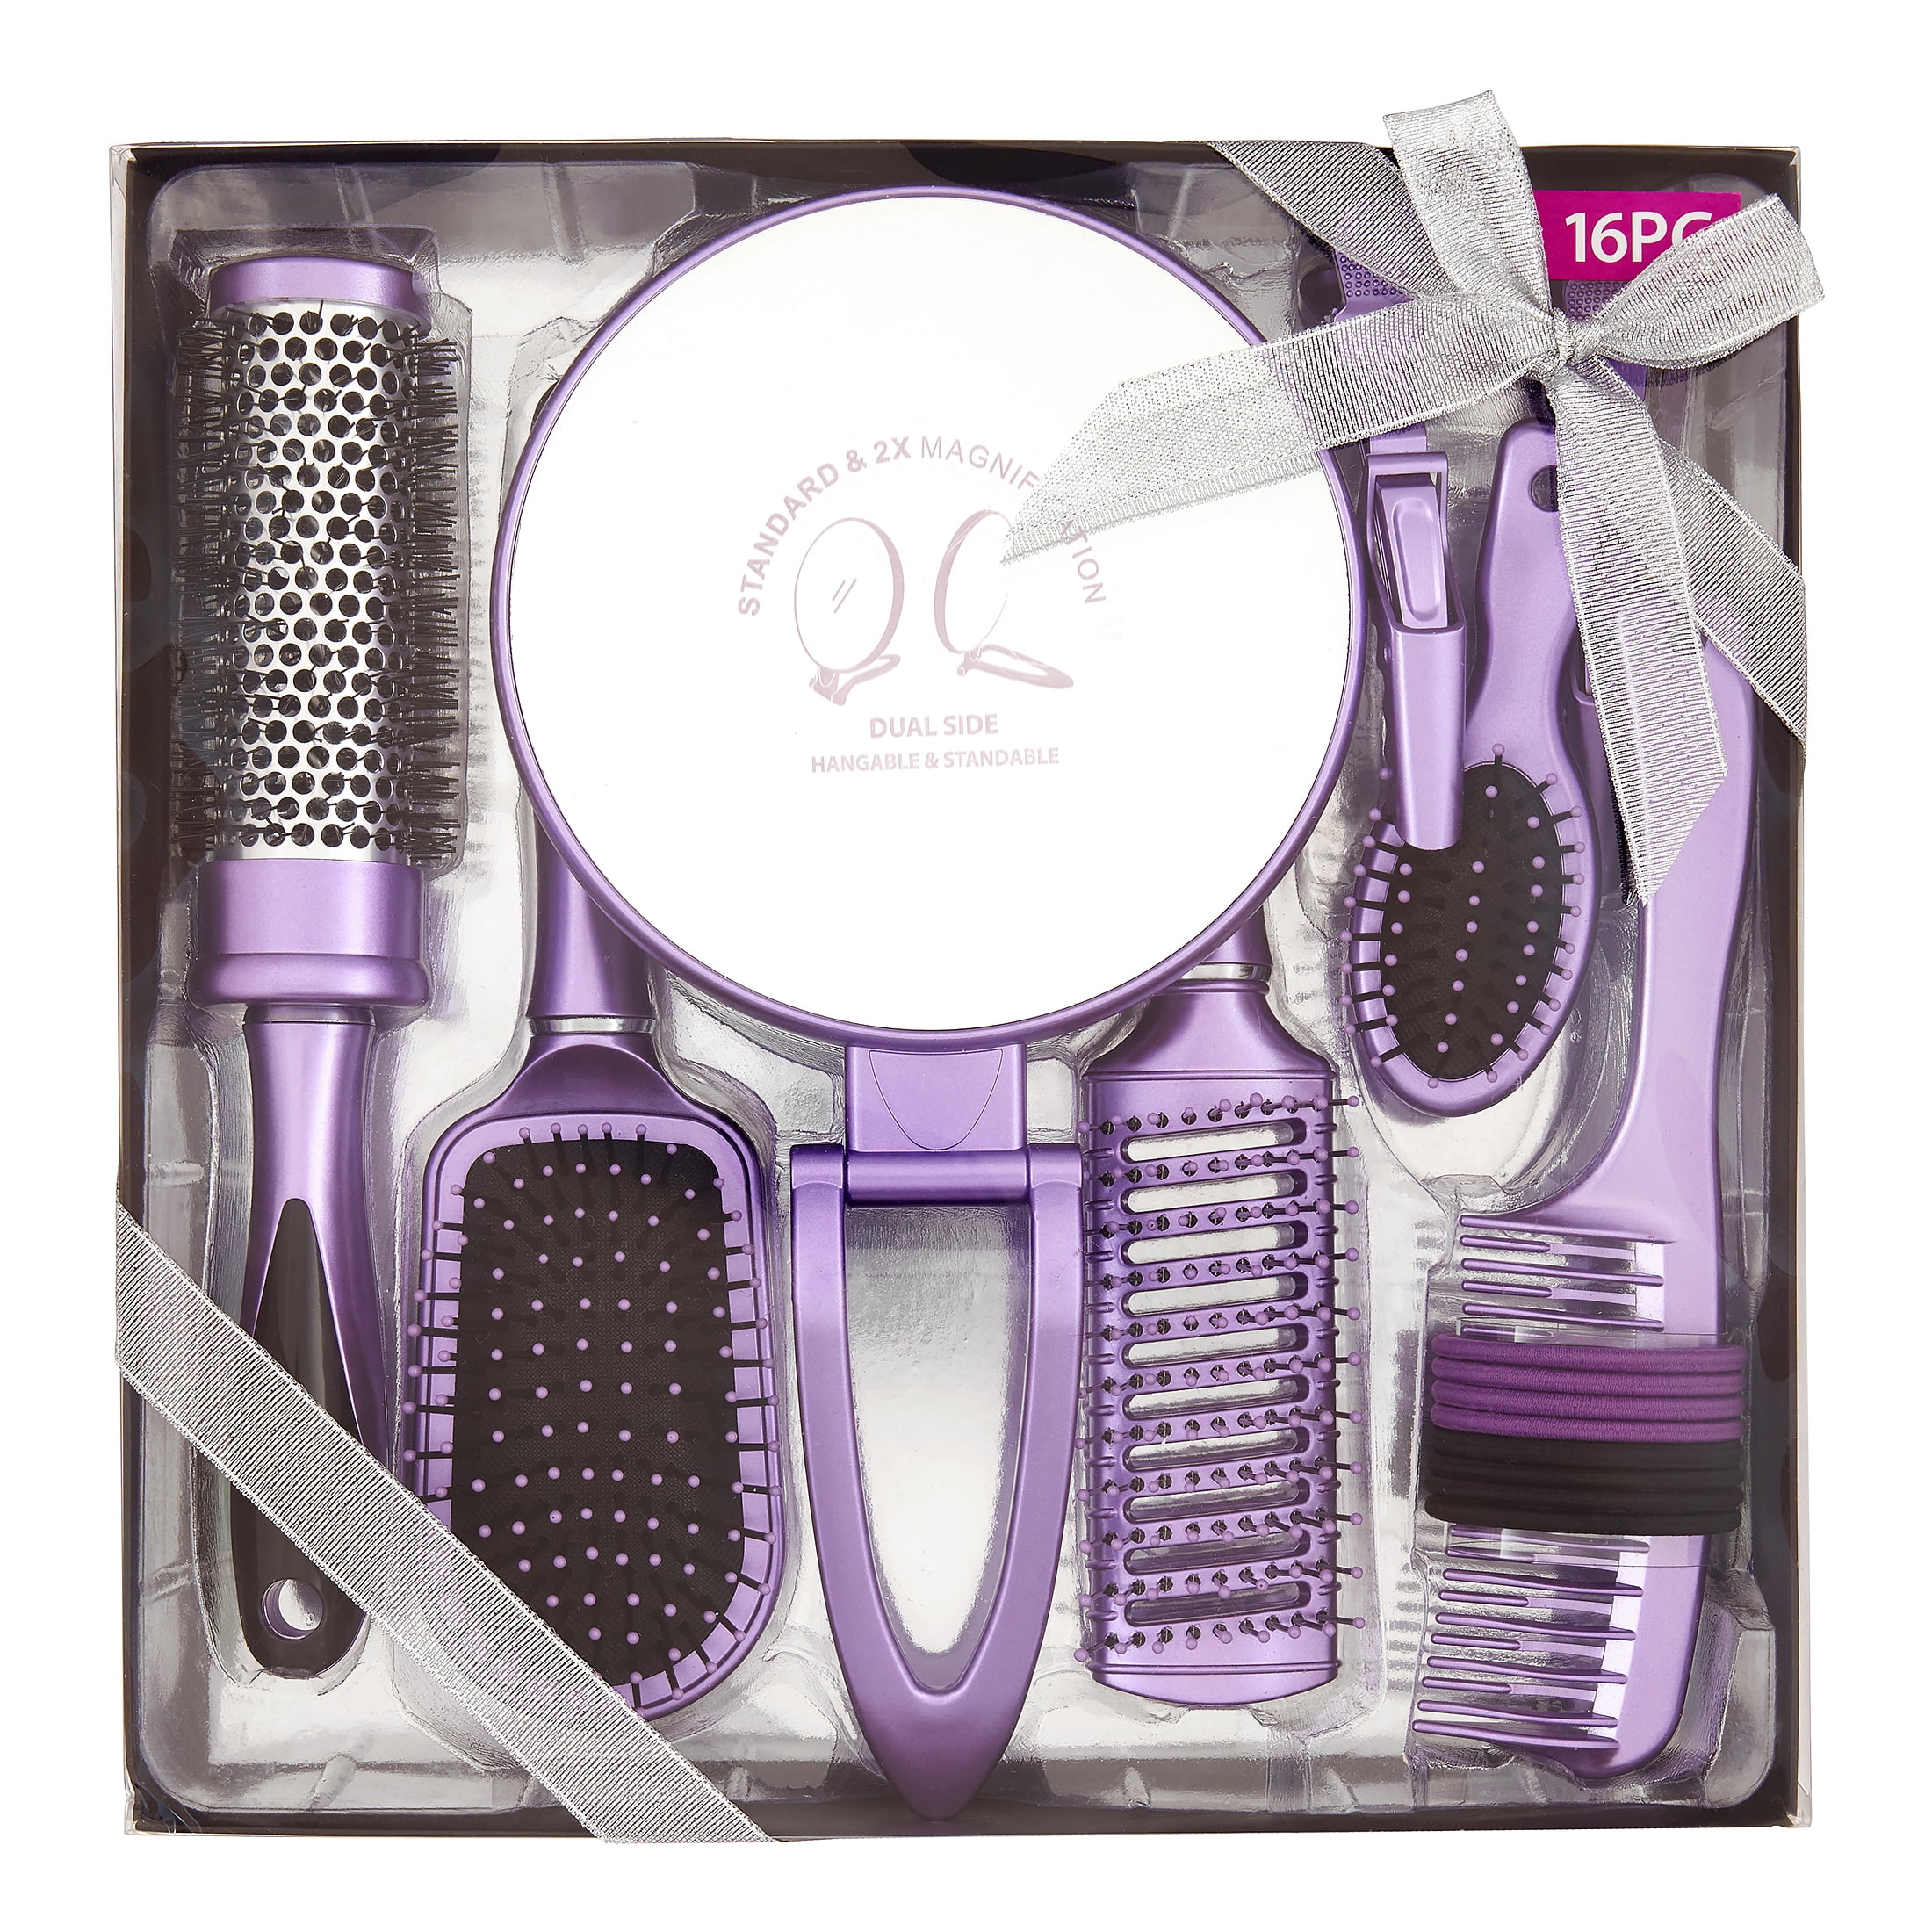 Hair Brush Styling Set with Magnifying Mirror, Lavender, 16 pieces ($22  Value) - Walmart.com